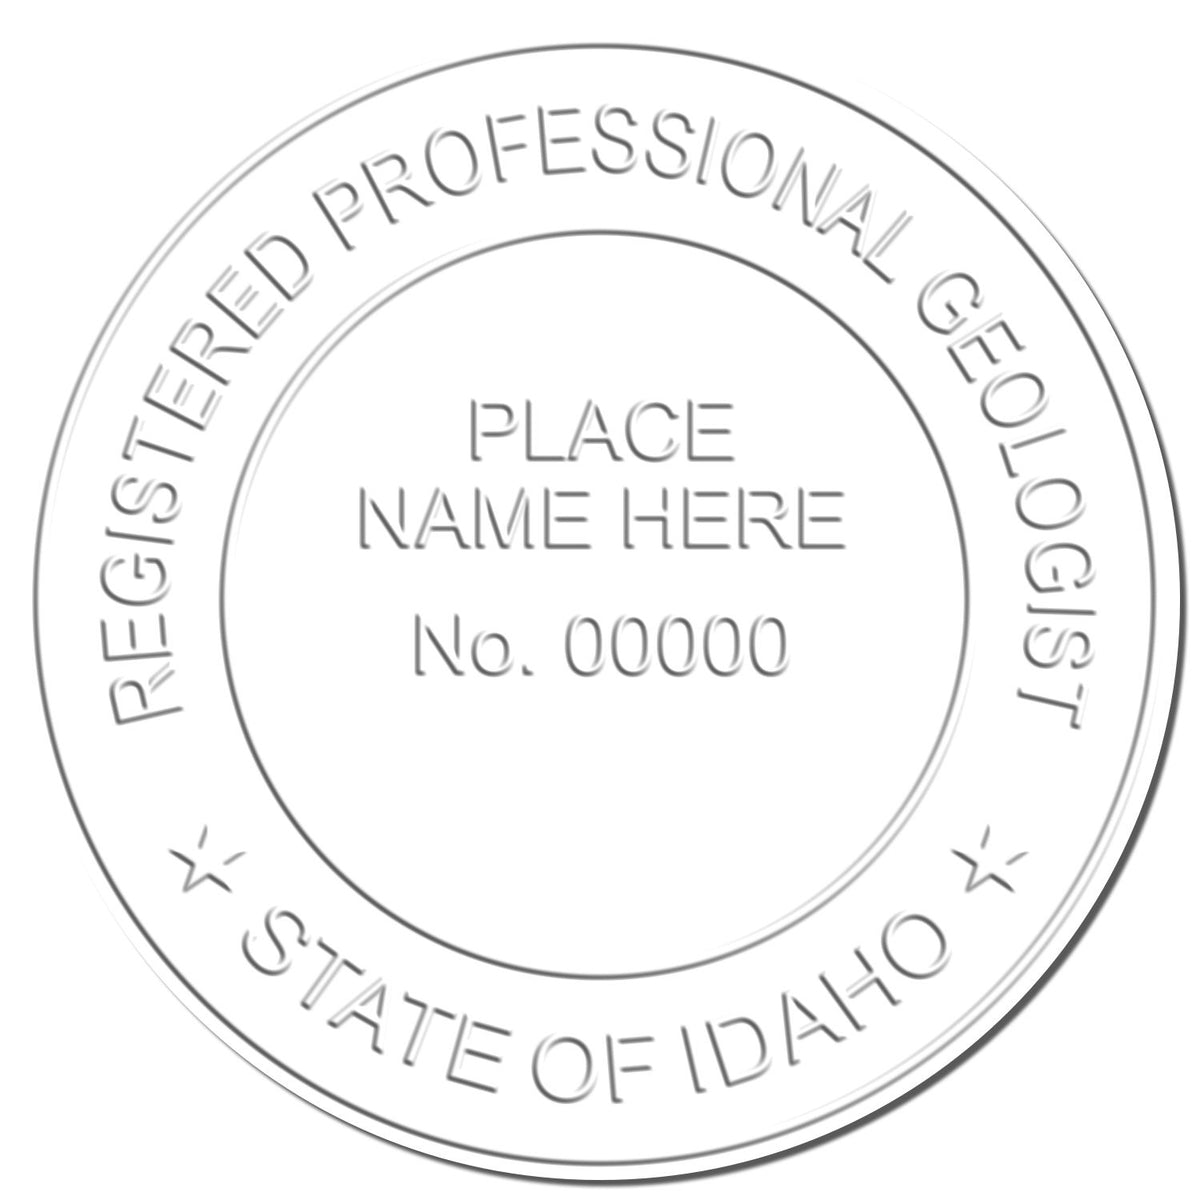 The Idaho Geologist Desk Seal stamp impression comes to life with a crisp, detailed image stamped on paper - showcasing true professional quality.